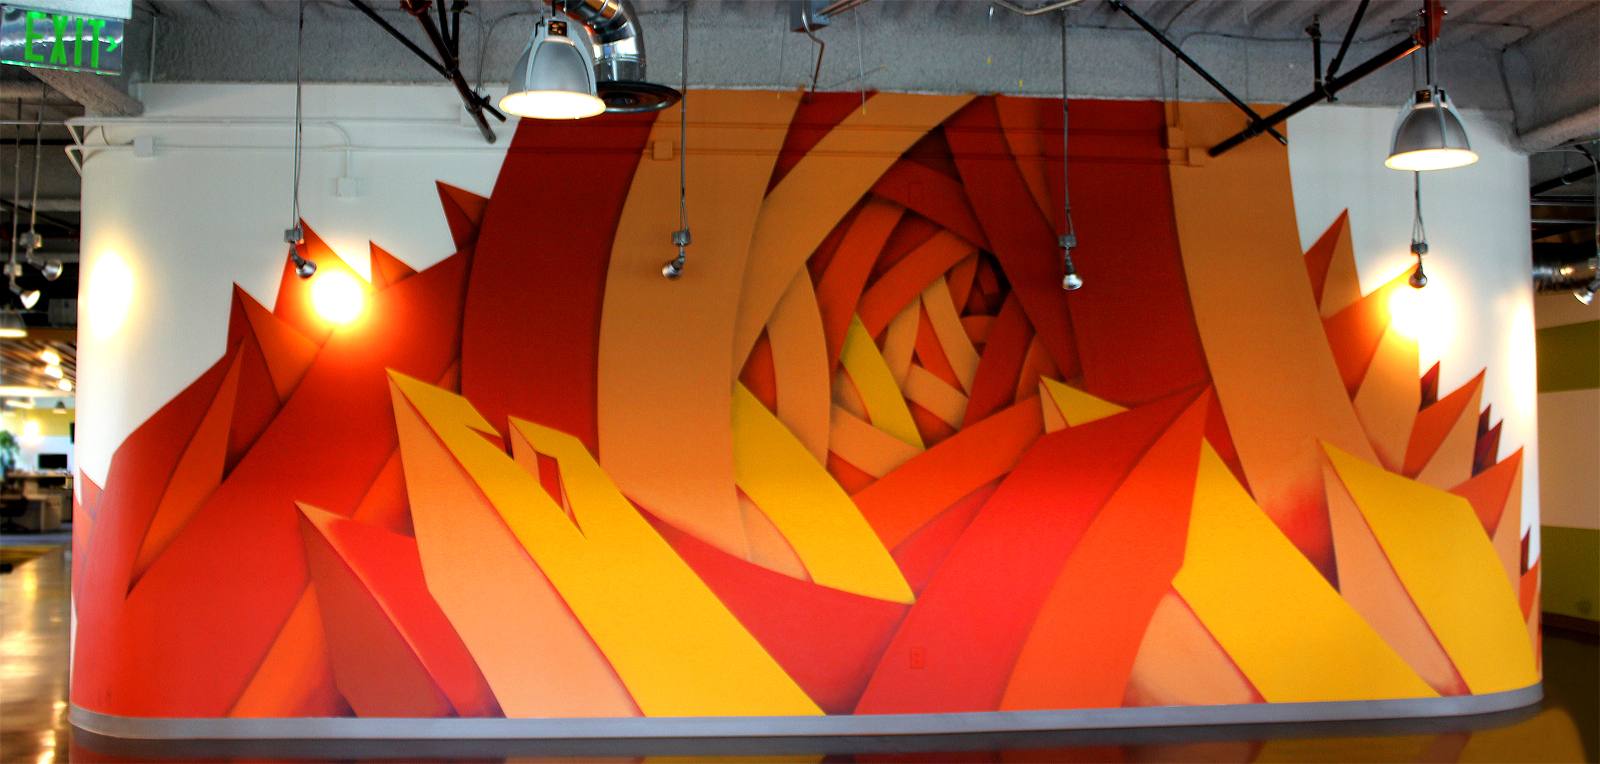 Apexer was commissioned to create a monochromatic mural for their San Francisco office